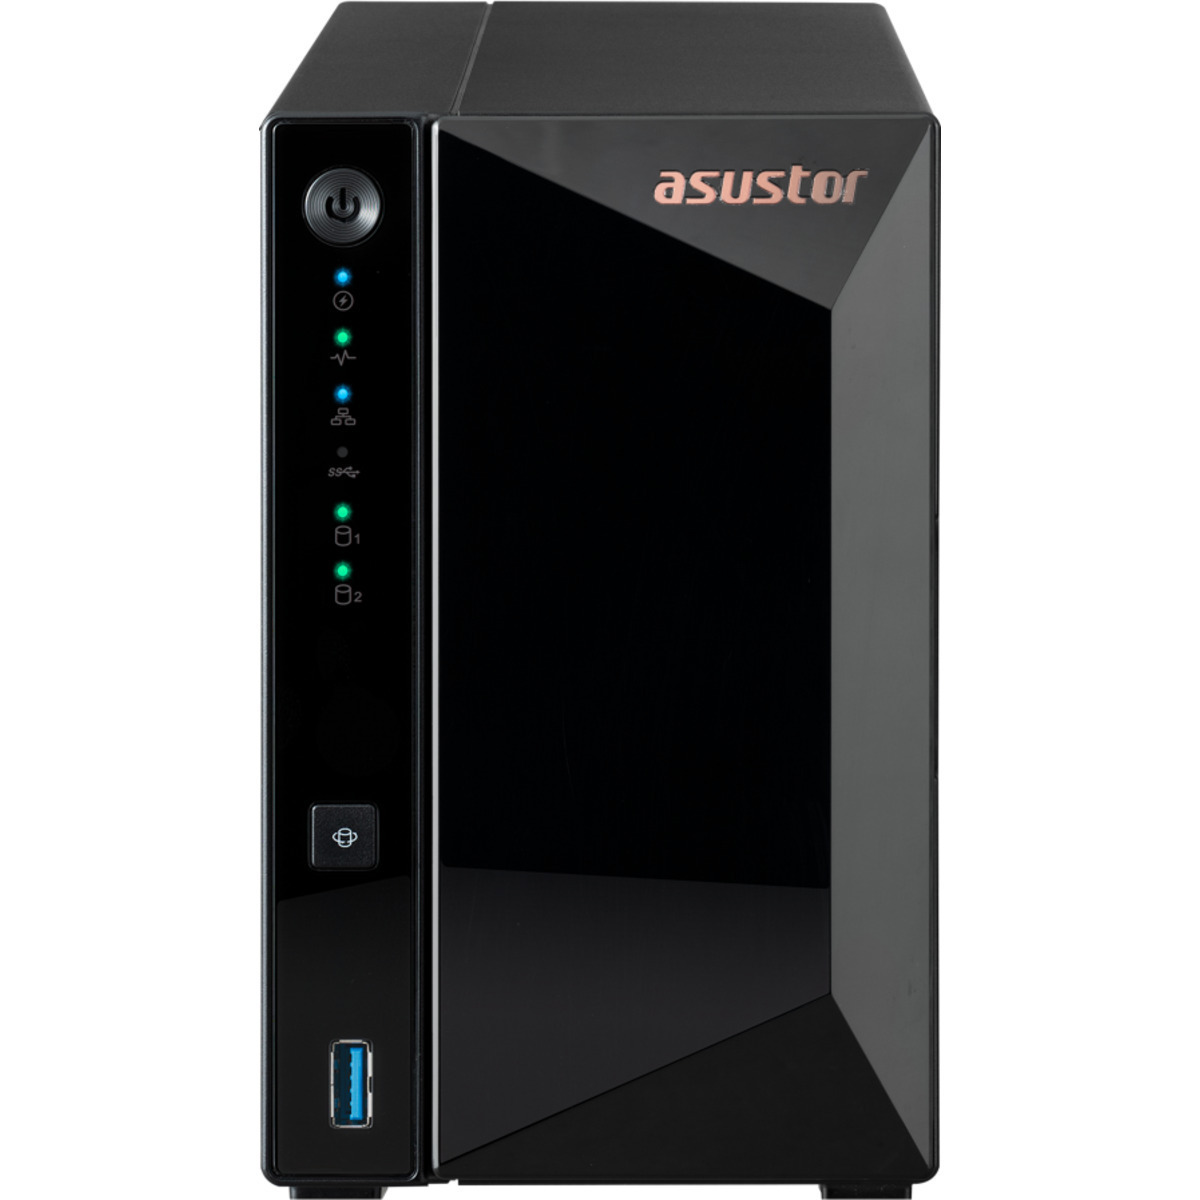 ASUSTOR DRIVESTOR 2 Pro AS3302T 4tb 2-Bay Desktop Personal / Basic Home / Small Office NAS - Network Attached Storage Device 2x2tb Samsung 870 EVO MZ-77E2T0BAM 2.5 560/530MB/s SATA 6Gb/s SSD CONSUMER Class Drives Installed - Burn-In Tested DRIVESTOR 2 Pro AS3302T